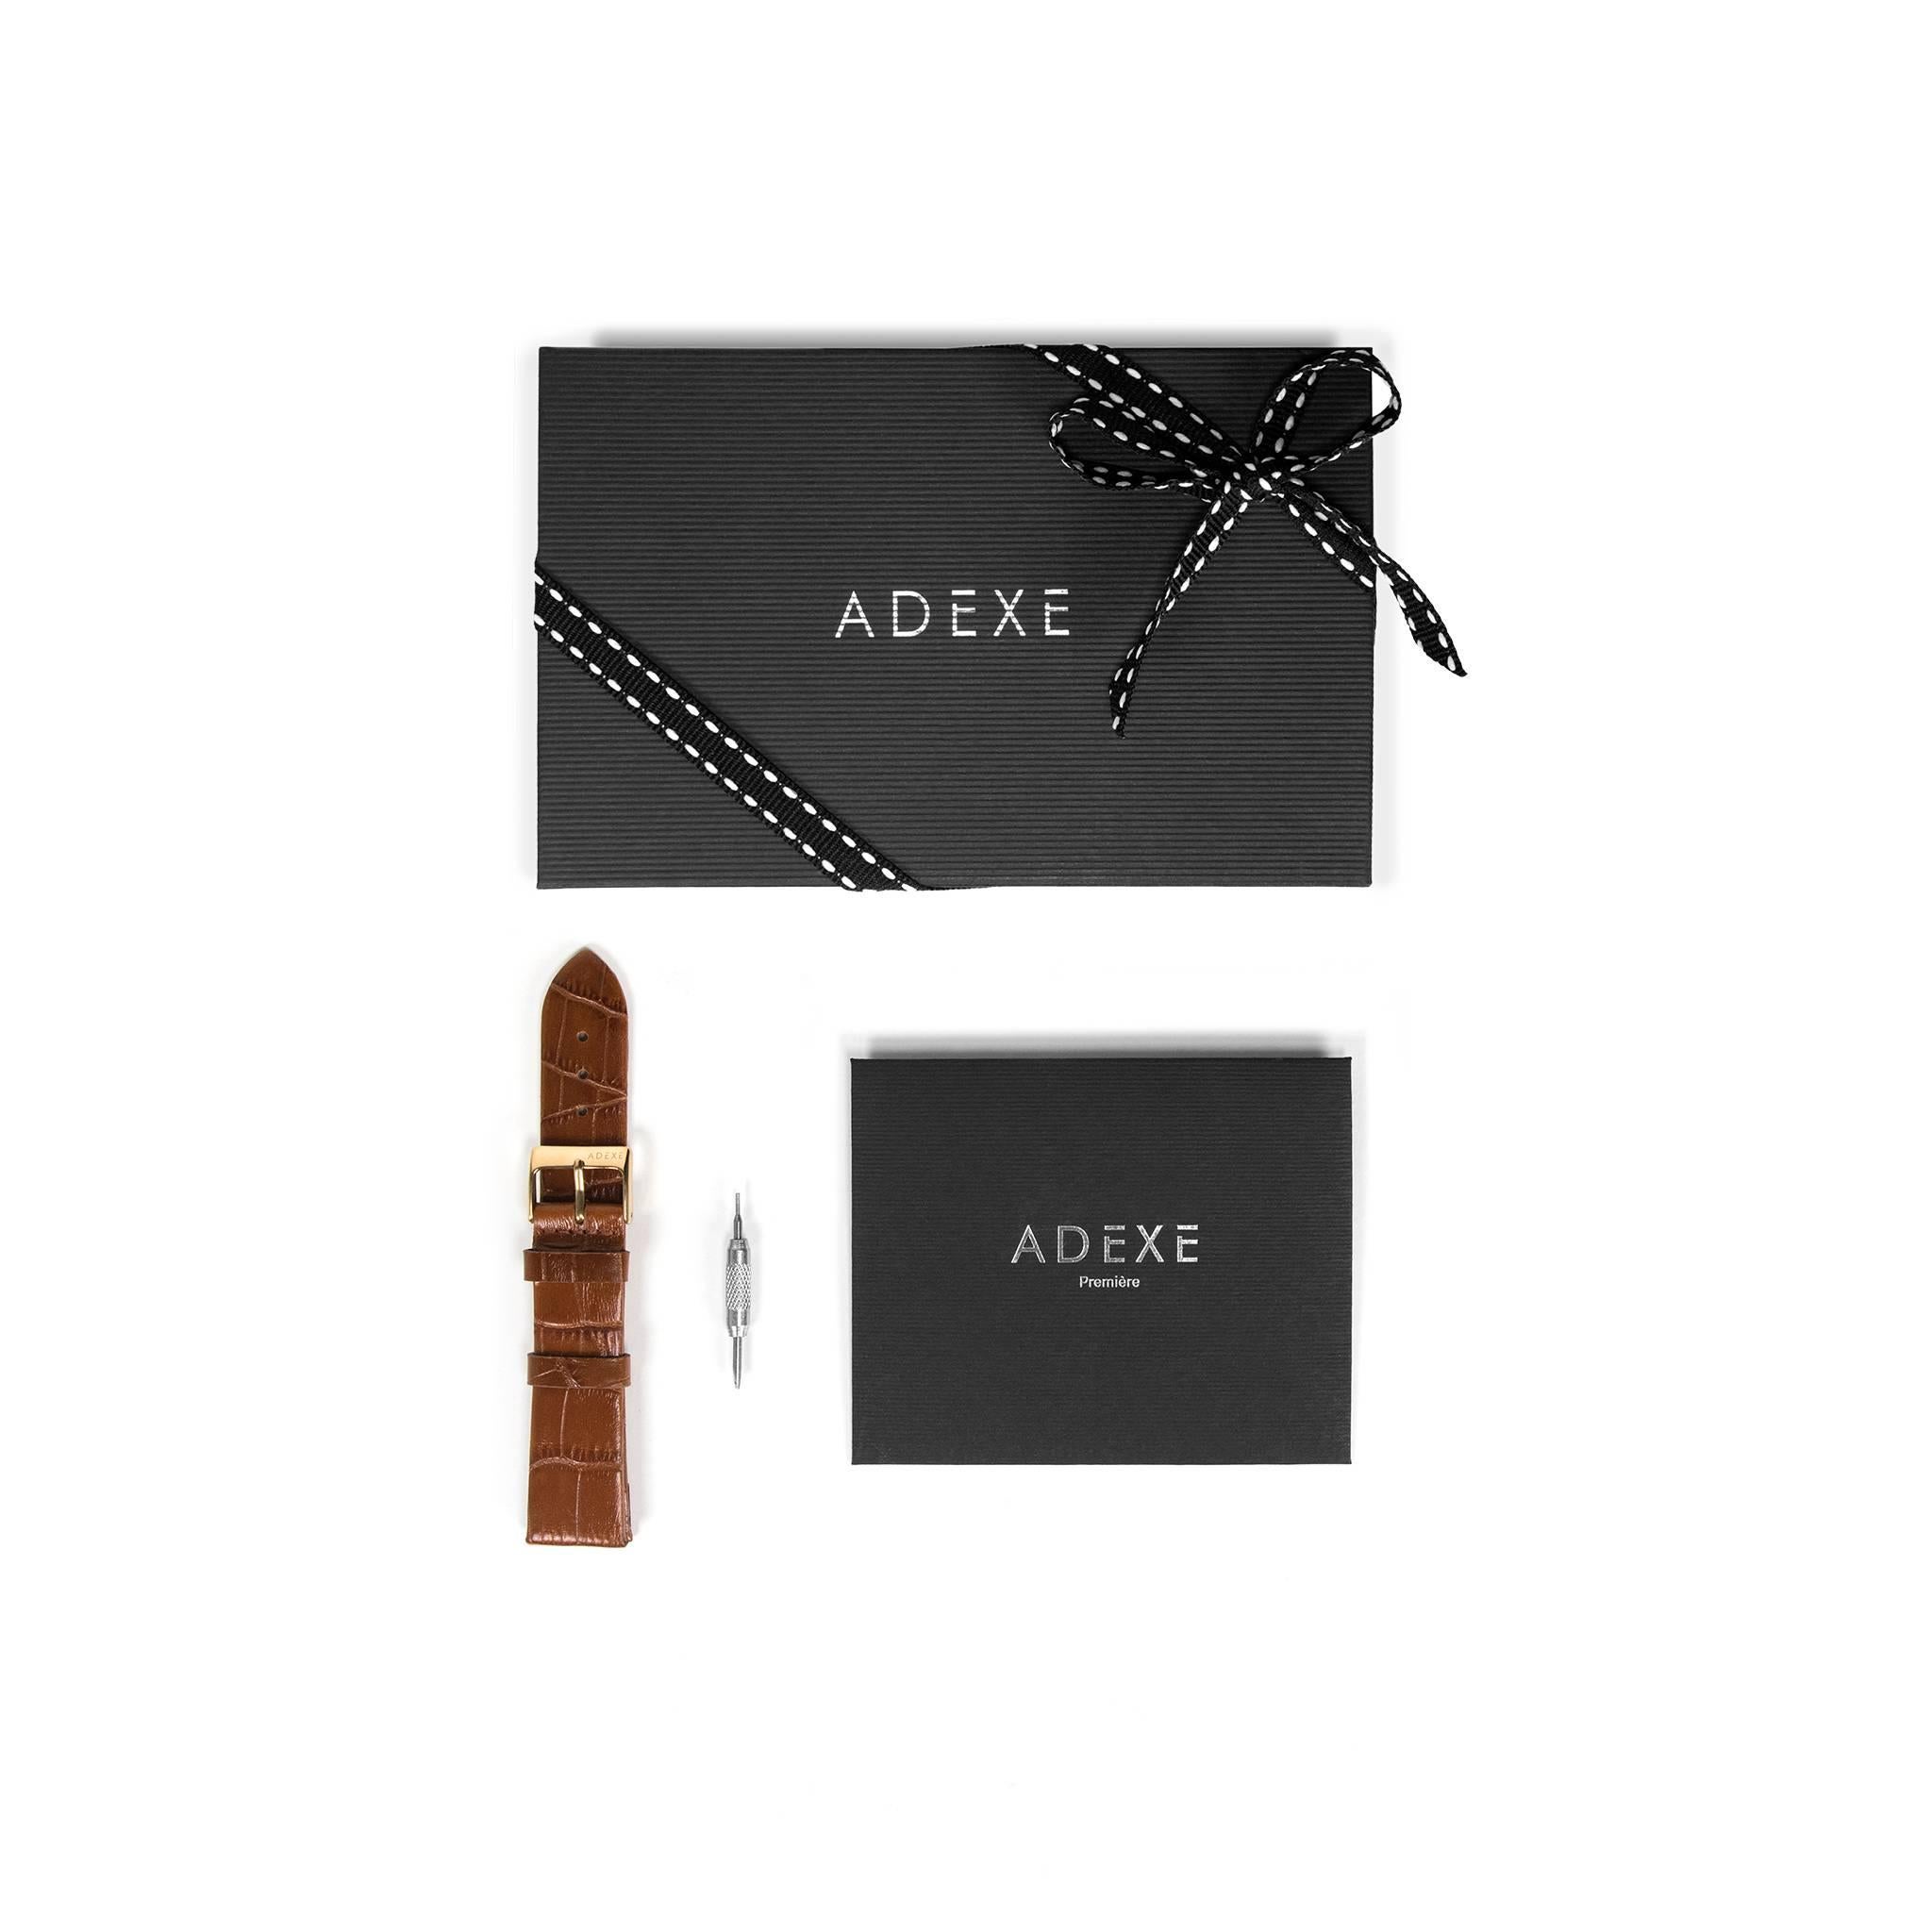 adexe watch gold